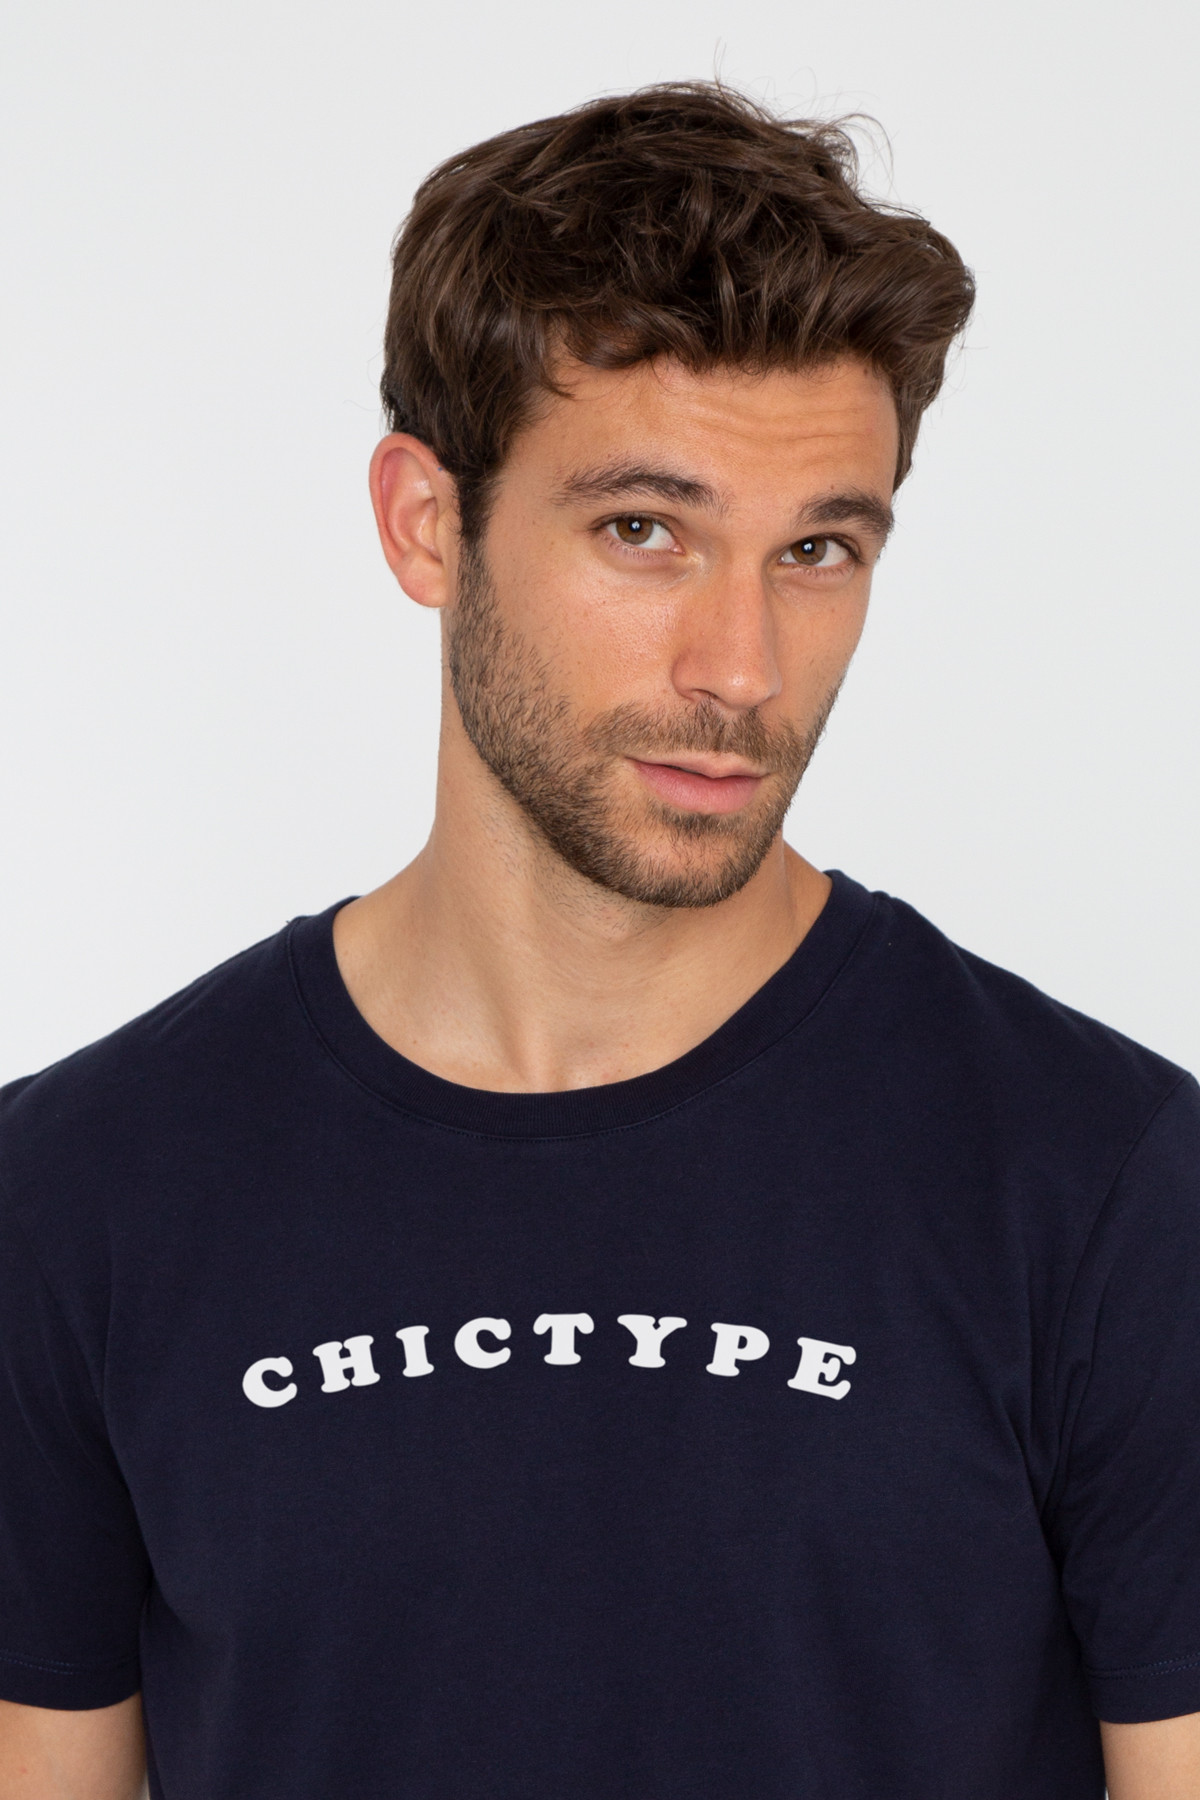 T-shirt CHICTYPE French Disorder